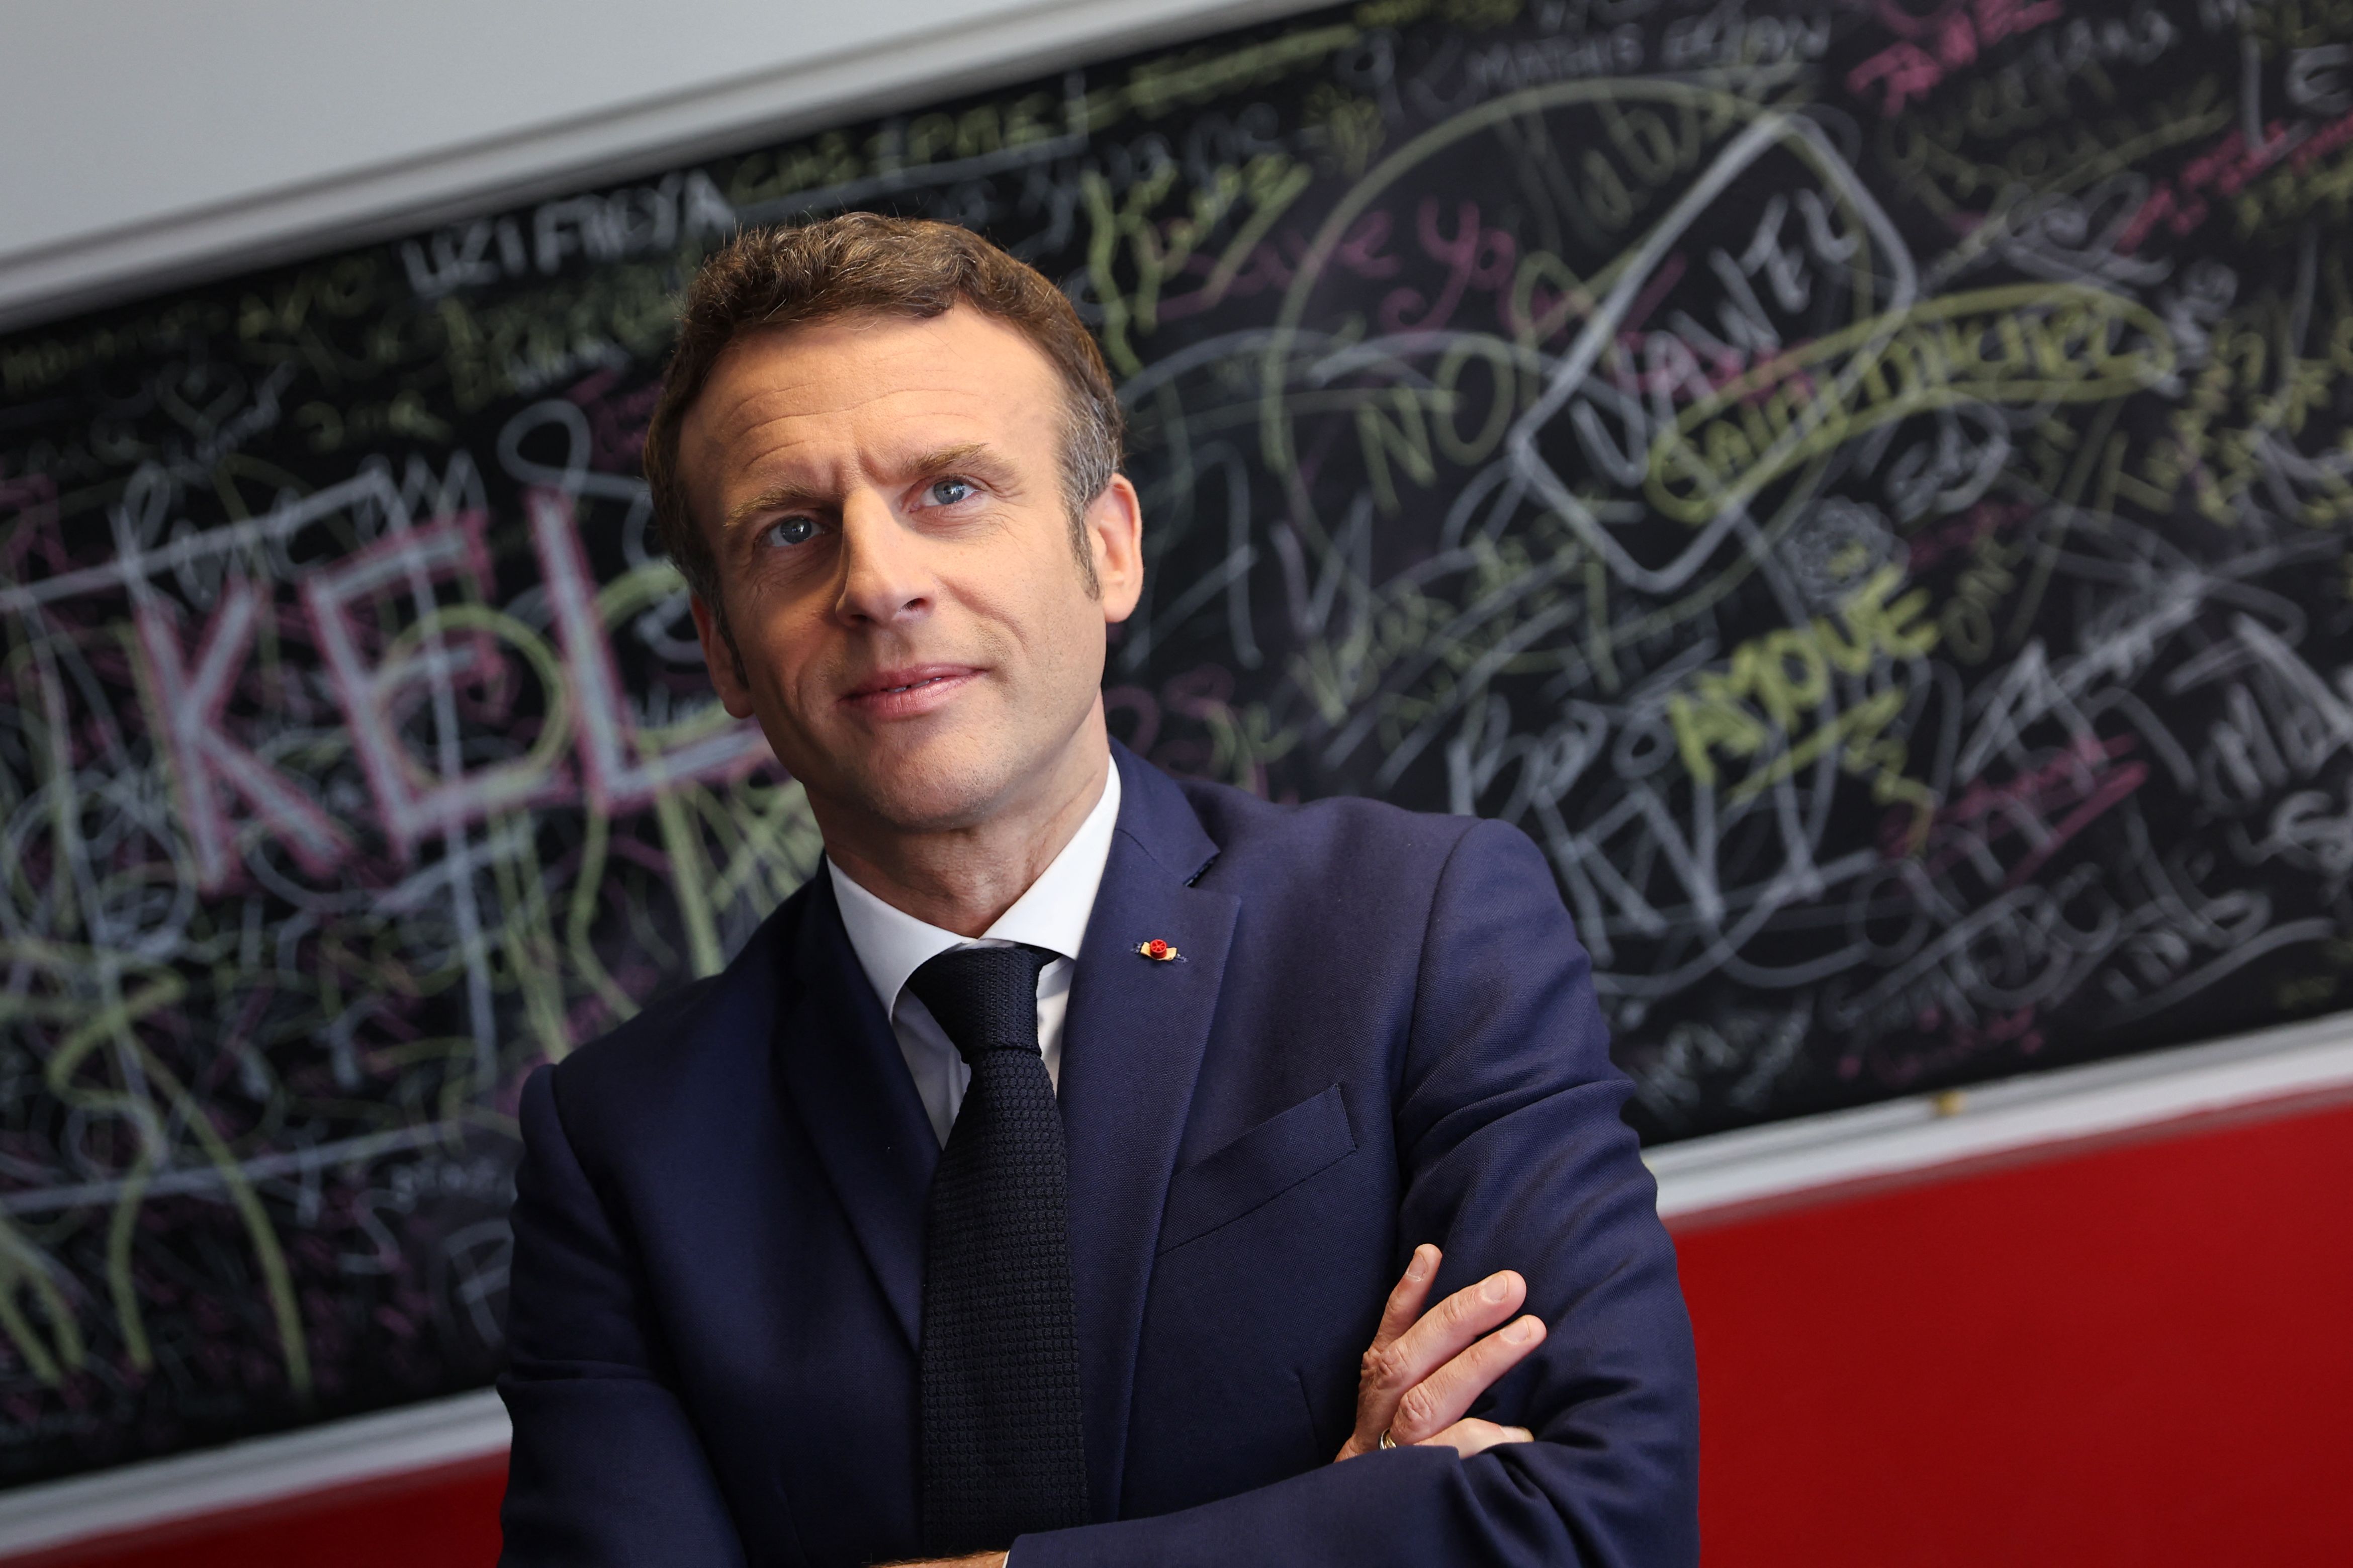 French President Emmanuel Macron waits before taking part in a France Inter radio talk show in Paris, France, on April 22.